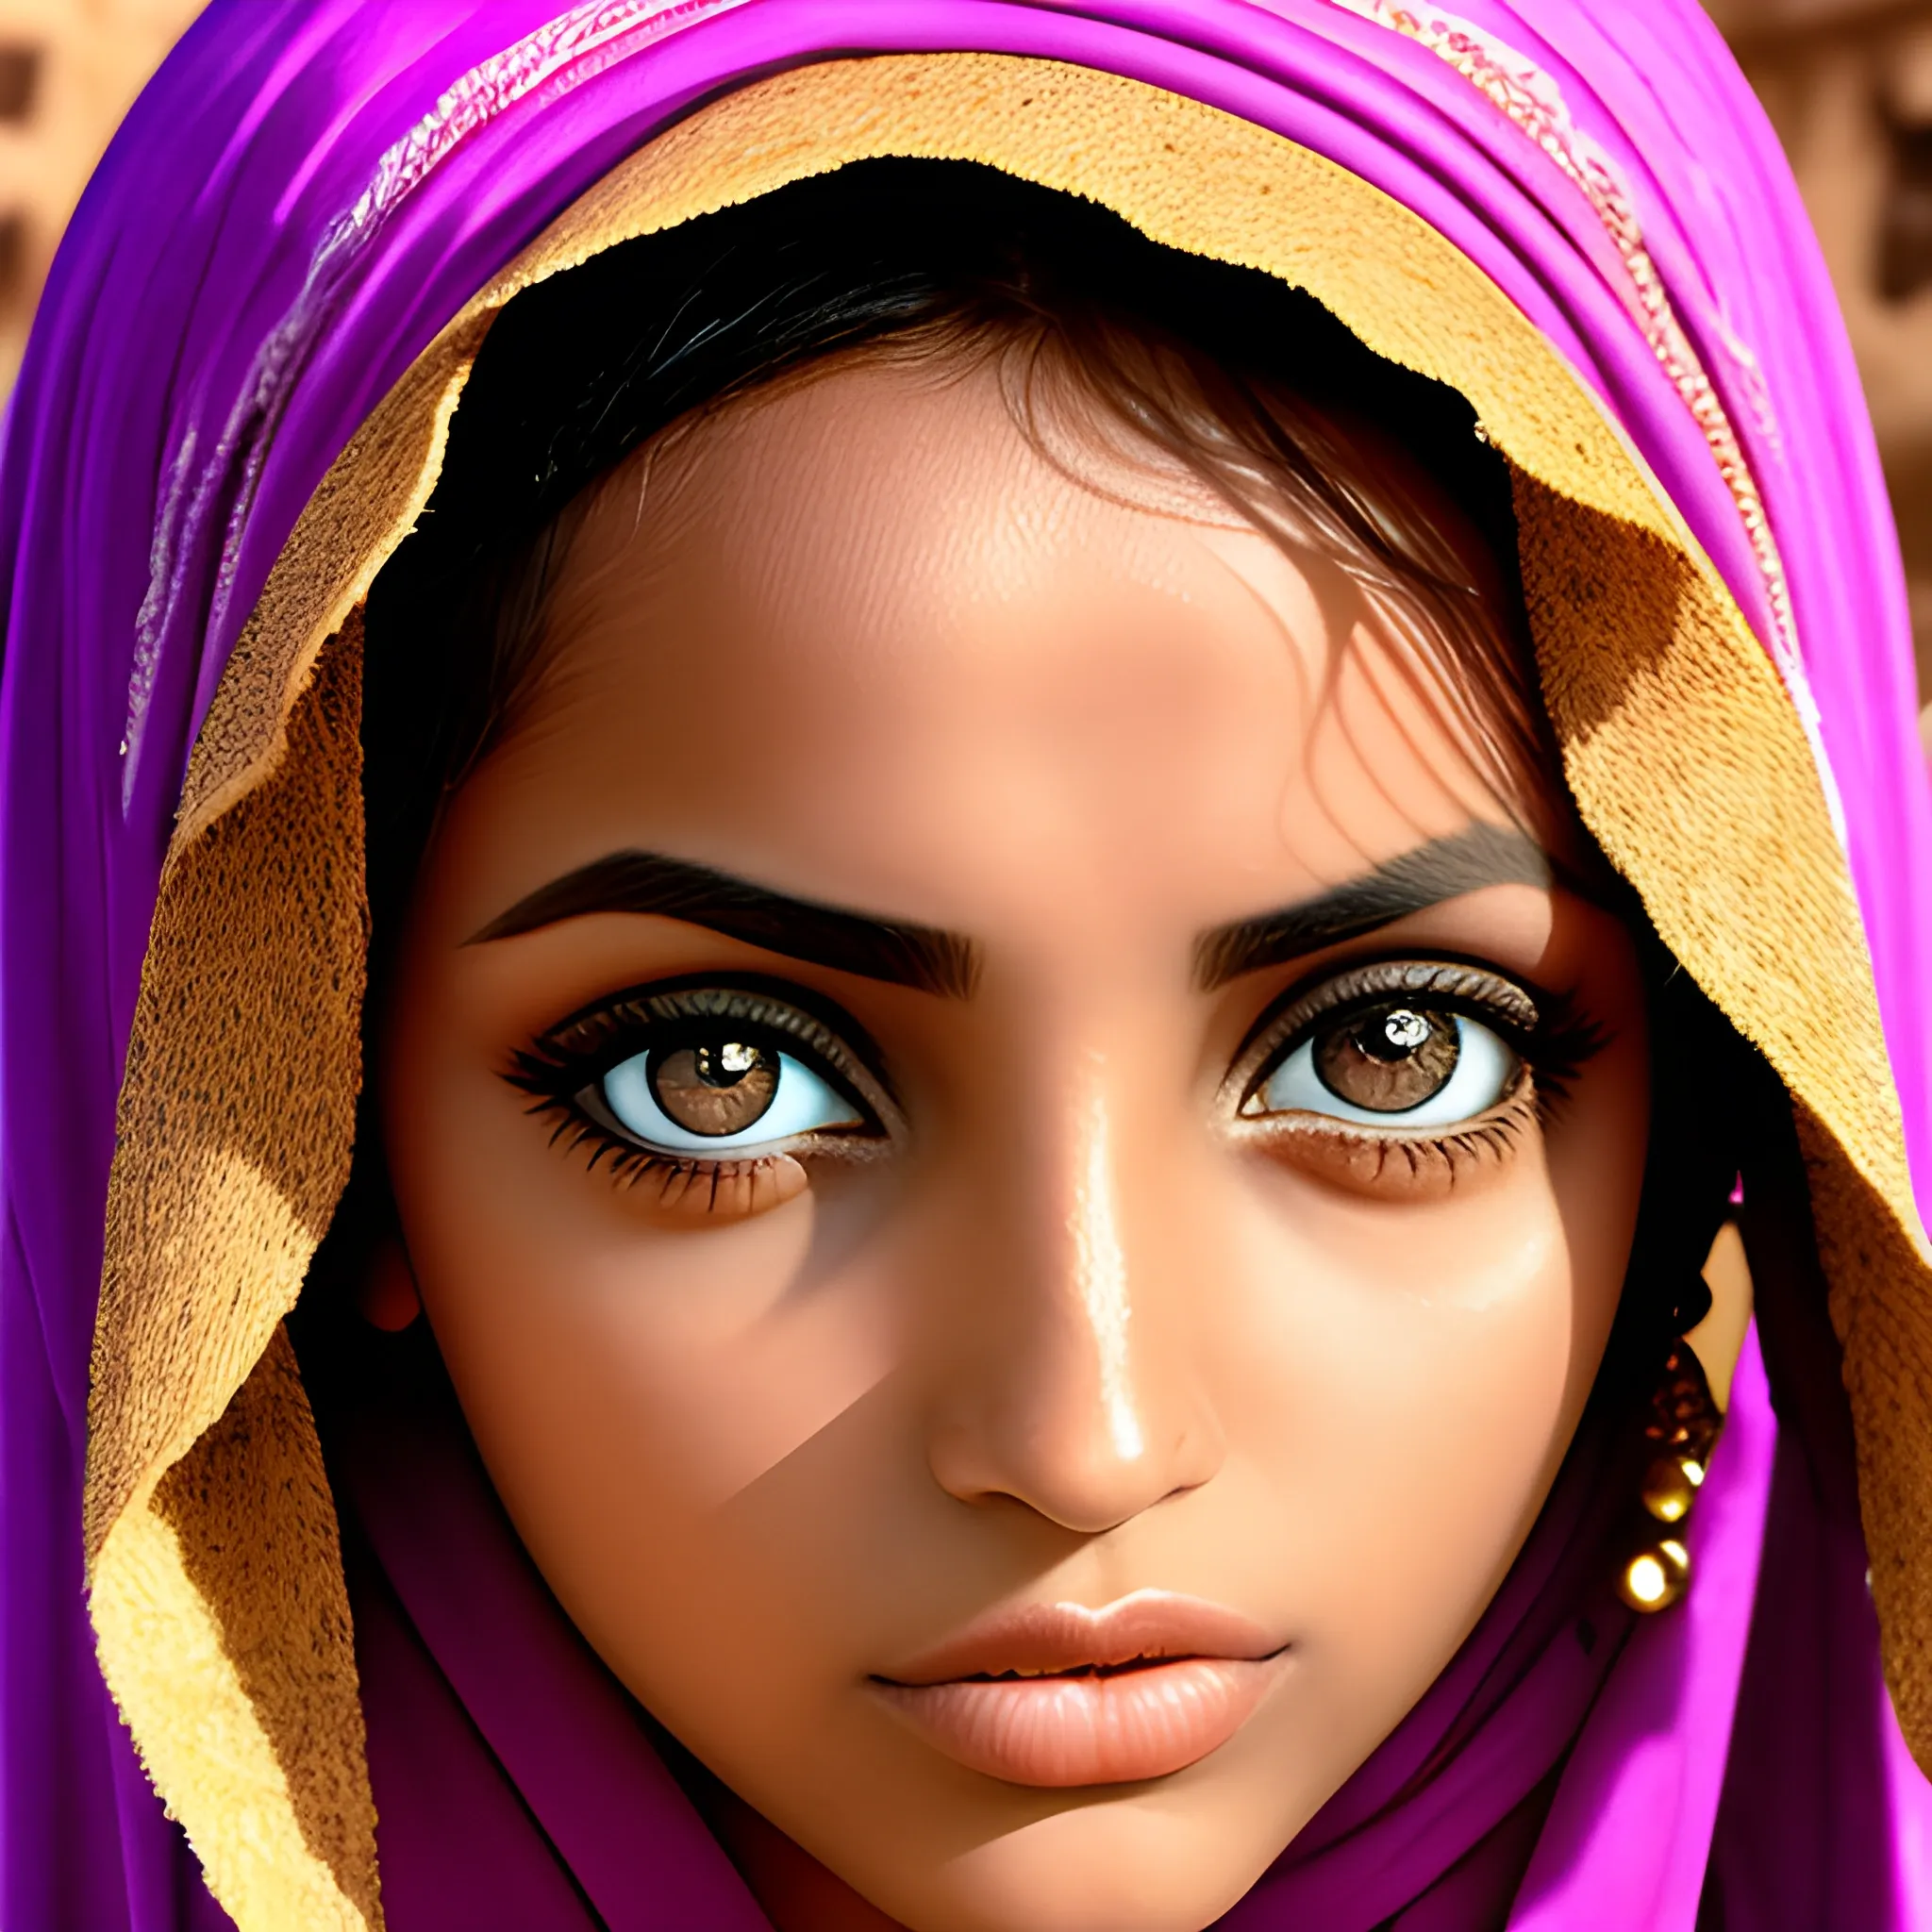 Moroccan beauty, big eyes, extreme picture quality, ambient light, exquisite facial features